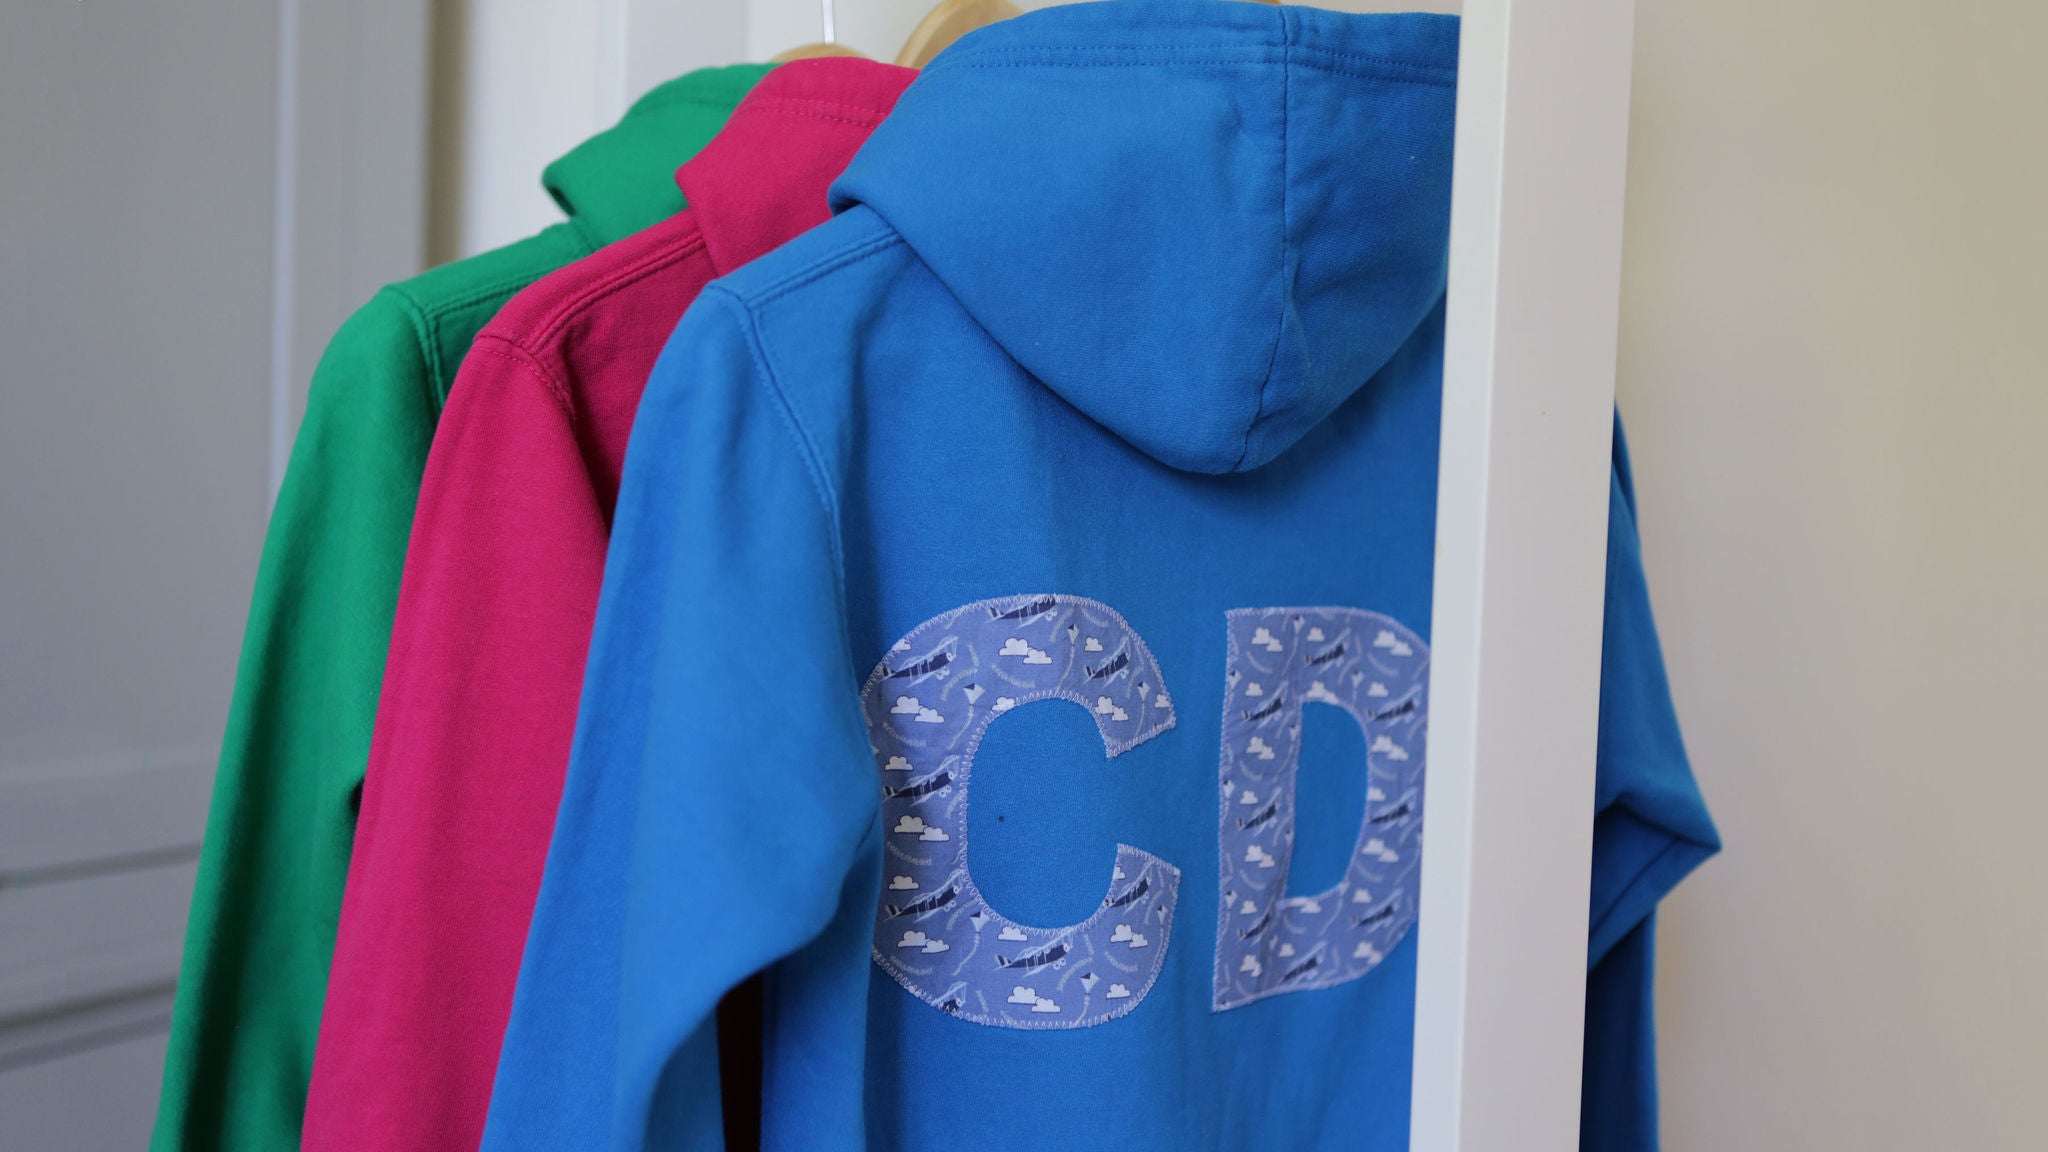 A green, pink and blue hoodie hanging on a rail. Just in view, on the back of the blue hoodie, are the letters CD appliqued on in a blue fabric with planes and clouds printed on.